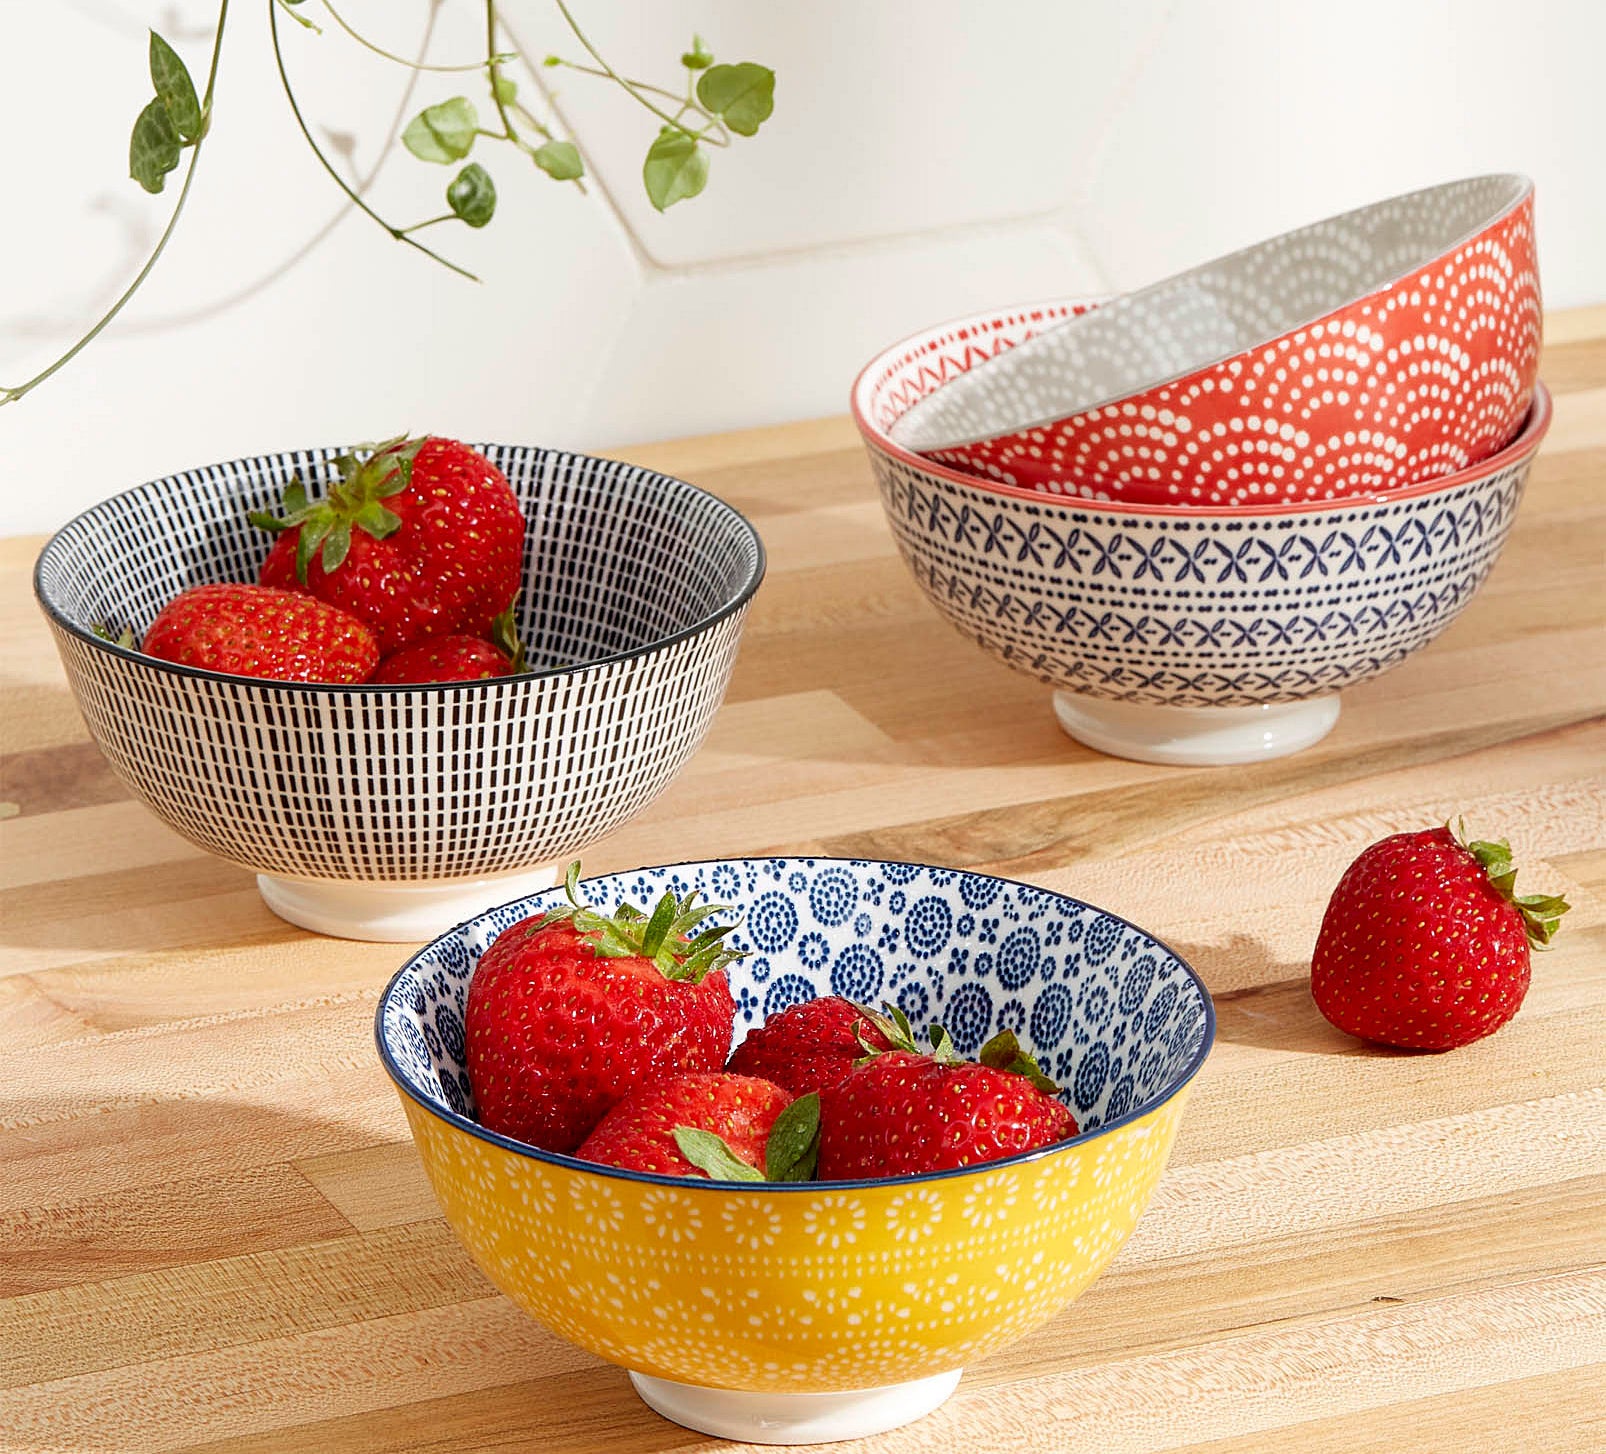 Four fun and fresh patterned bowls with strawberries